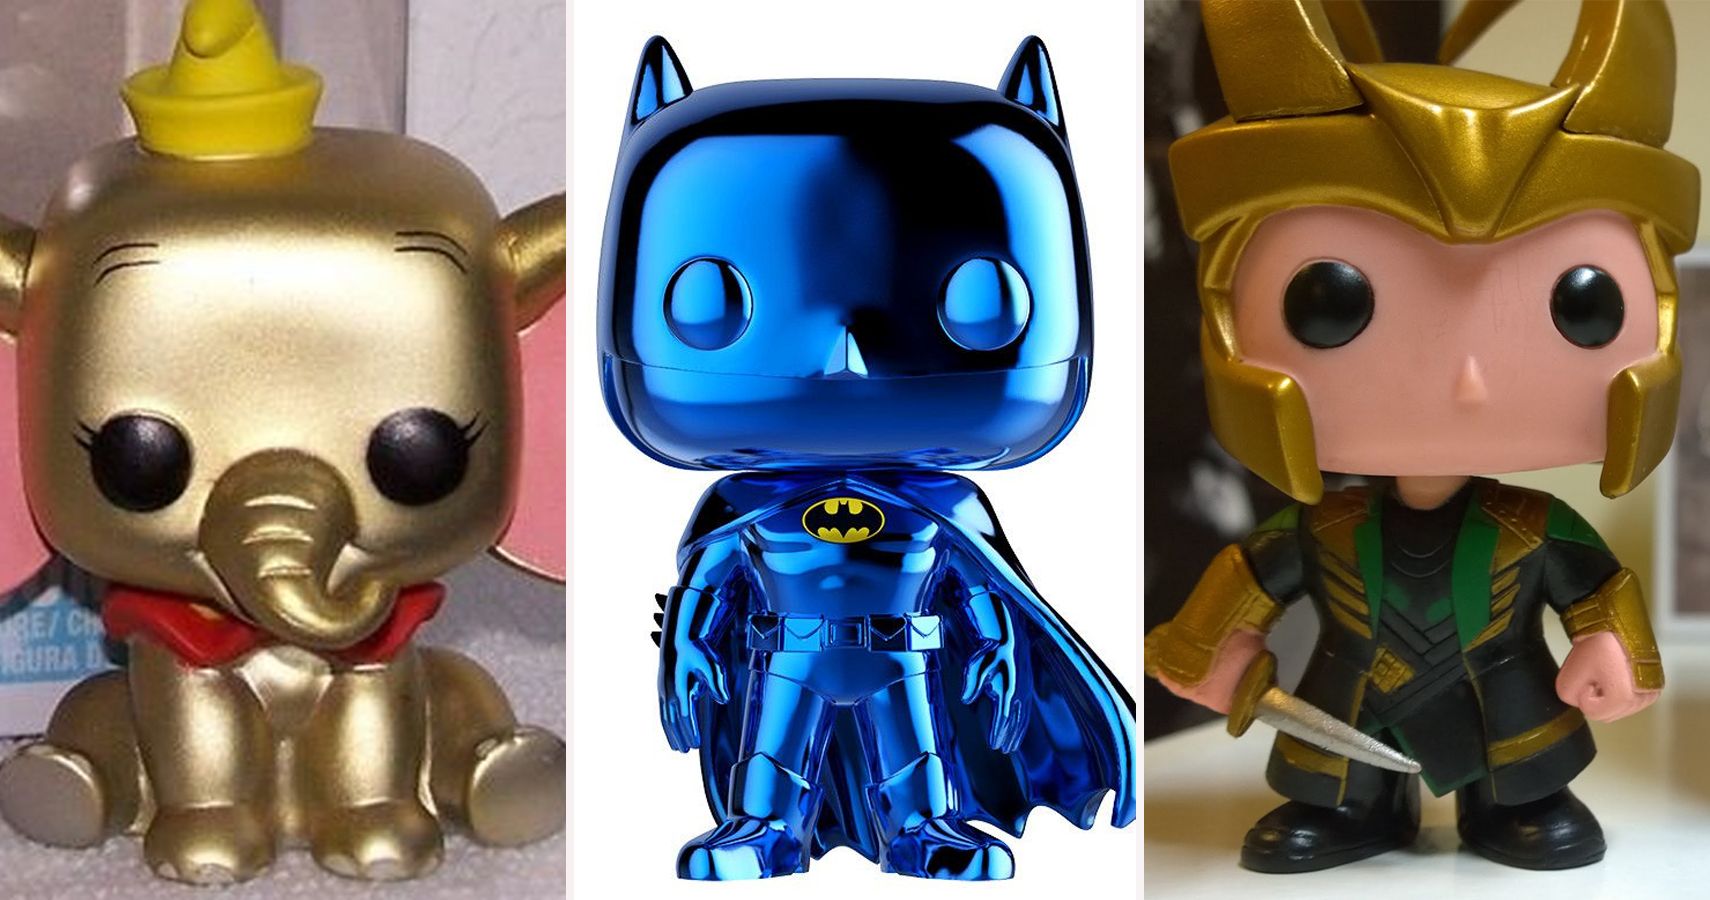 The 10 Funko Pop Figures (And How Worth)